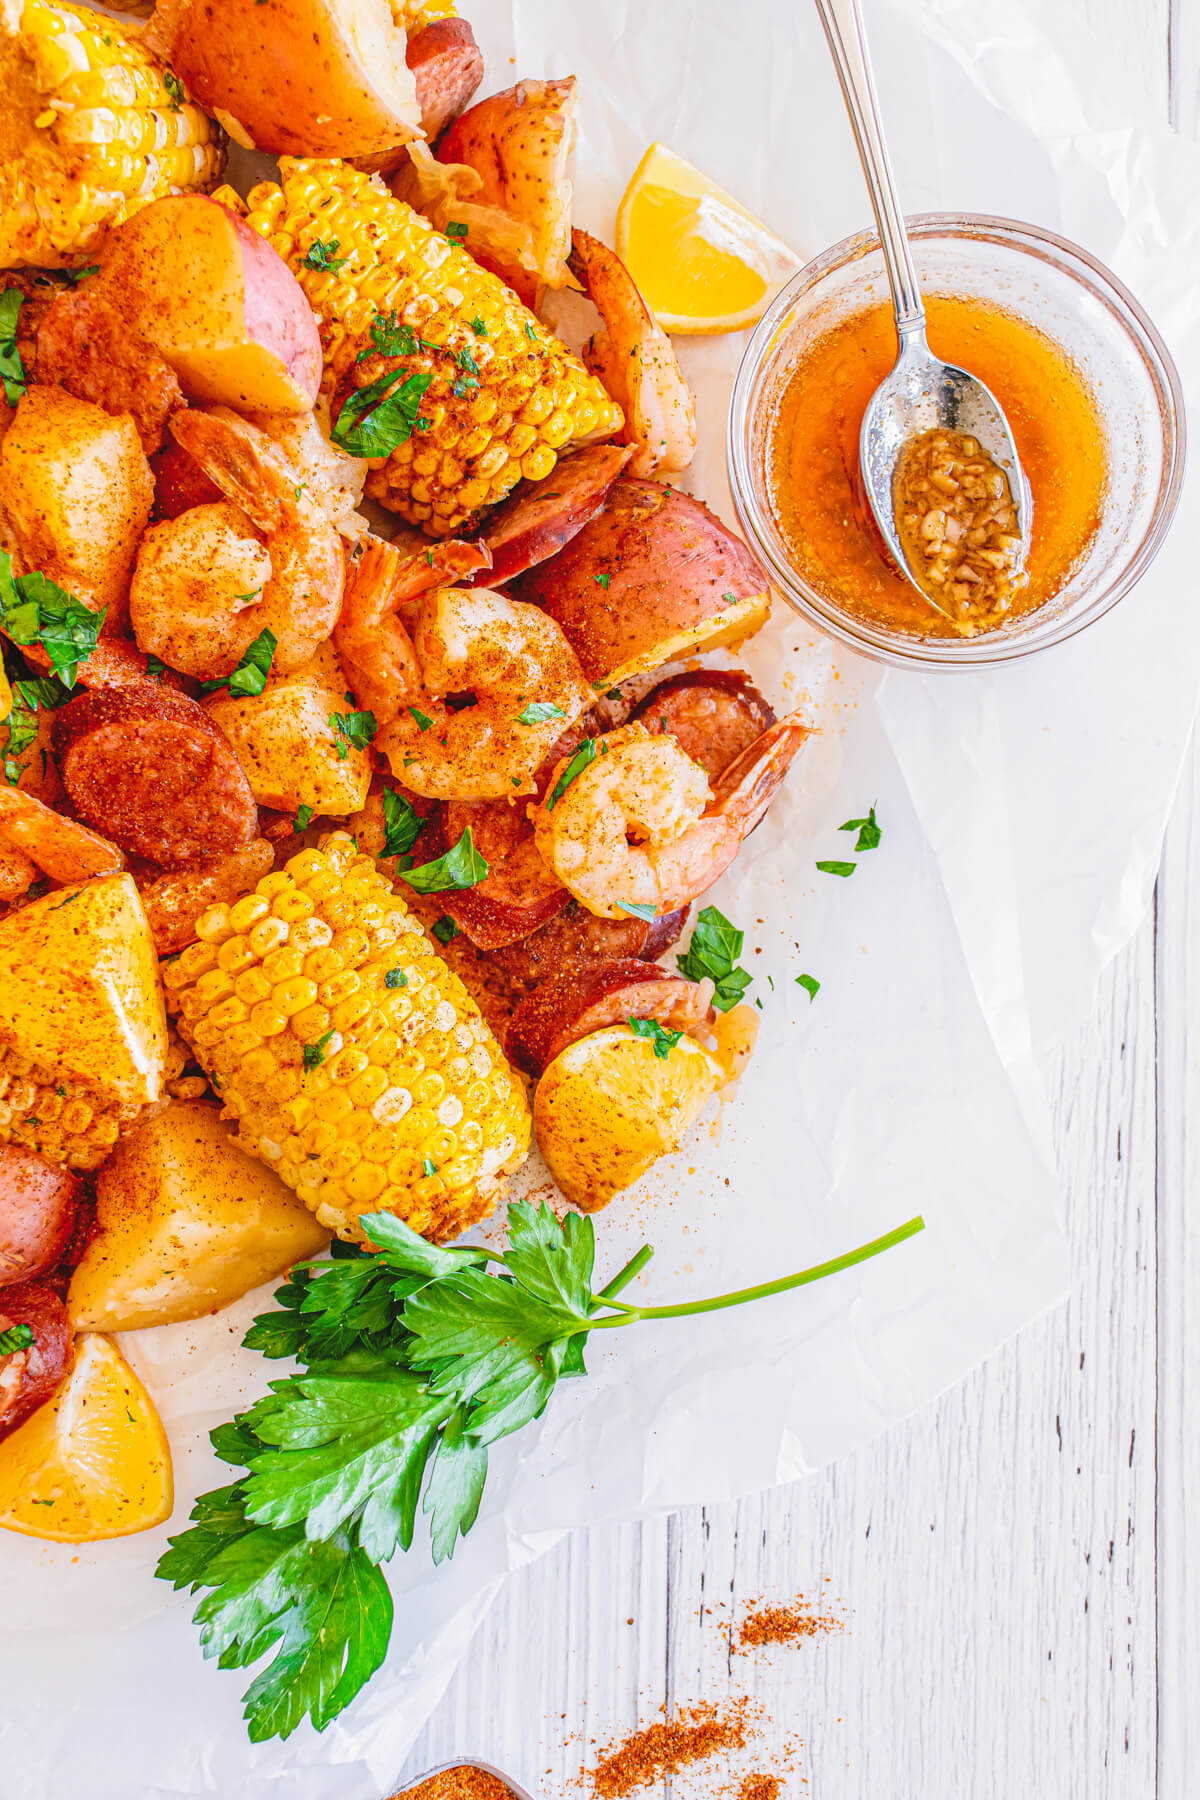 Cooked shrimp boil with spice coated shrimp, potatoes, sausage, and corn spread out on a white parchment paper.